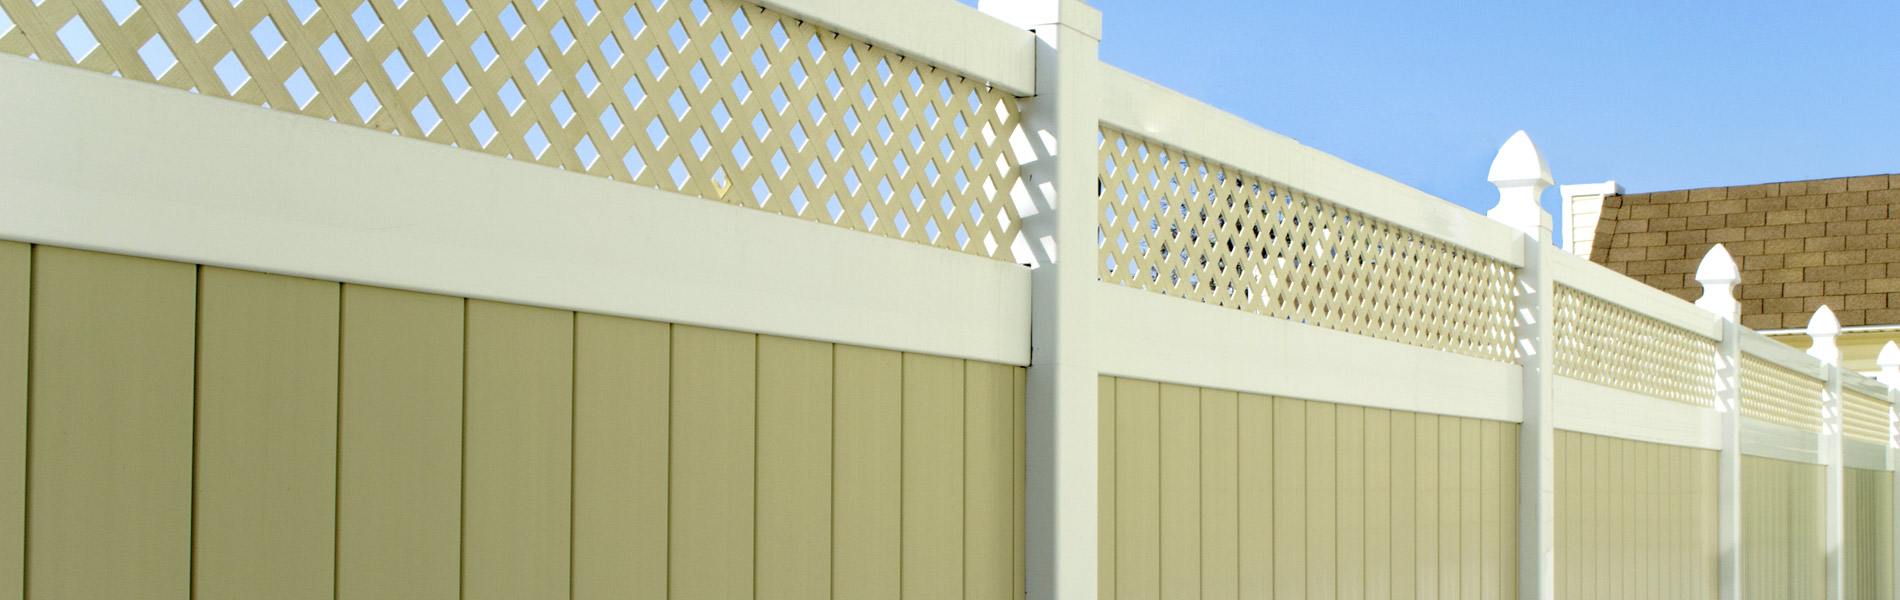 Vinyl Privacy Fence with Lattice Panels in South & Central Florida